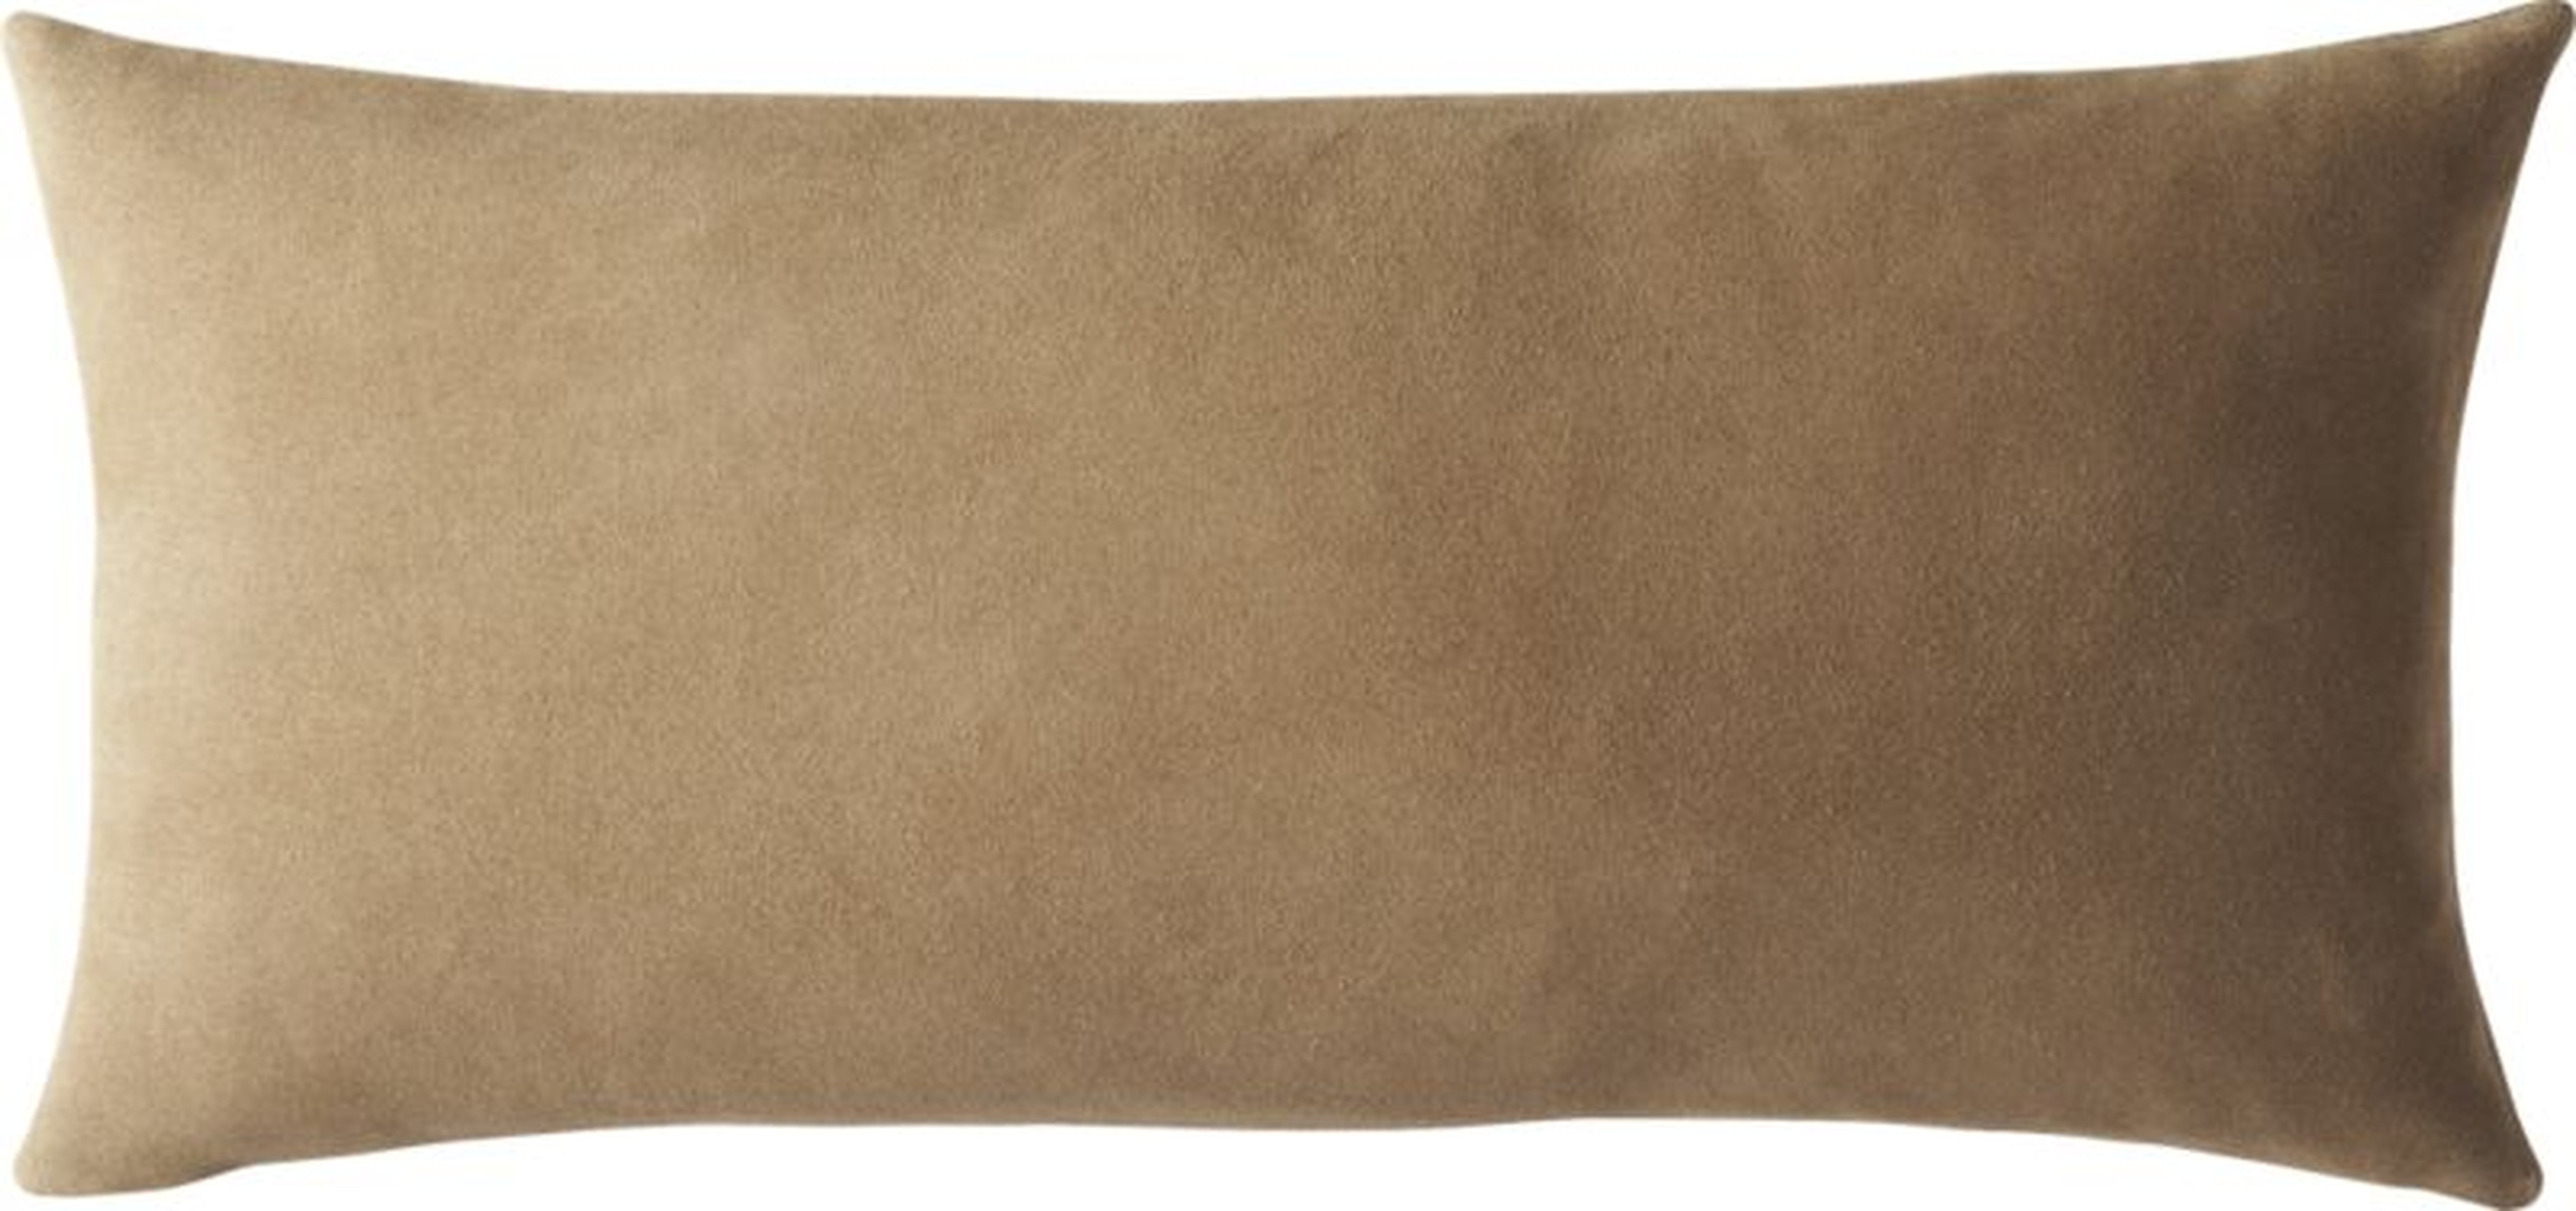 Suede Camel Tan Pillow  with Down-Alternative Insert - CB2